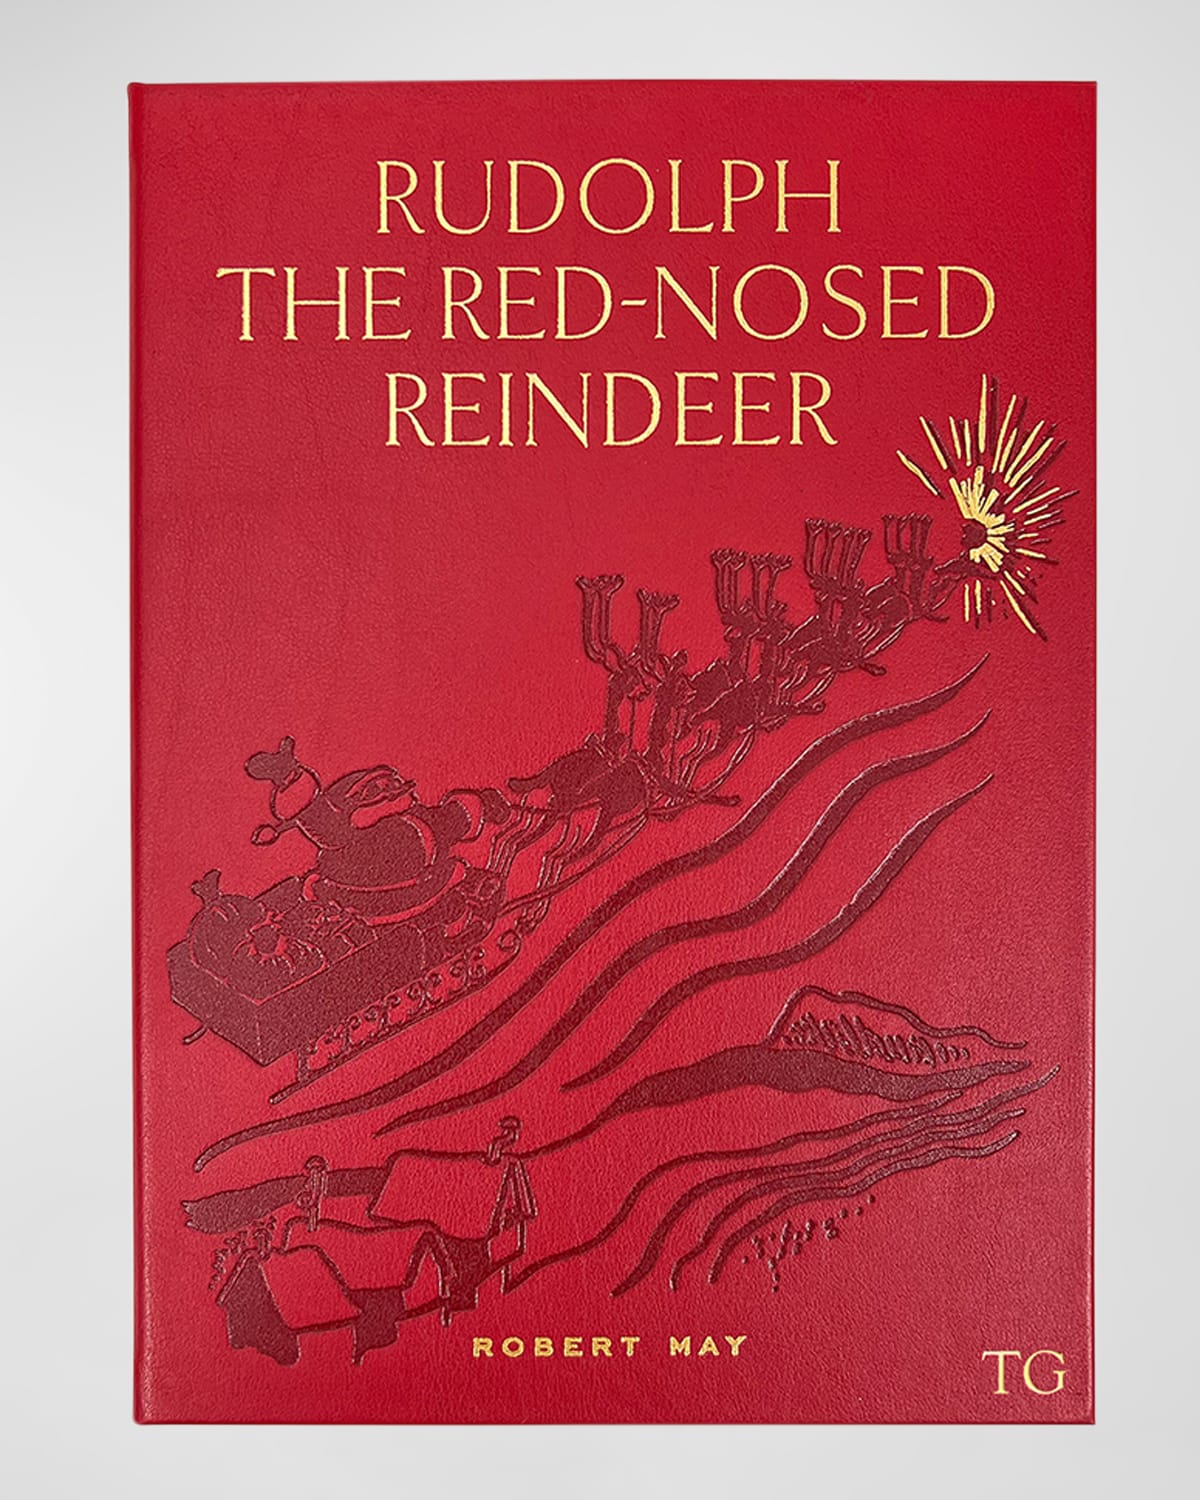 Shop Graphic Image Rudolph The Red-nosed Reindeer Book By Robert L. May, Leather-bound Edition